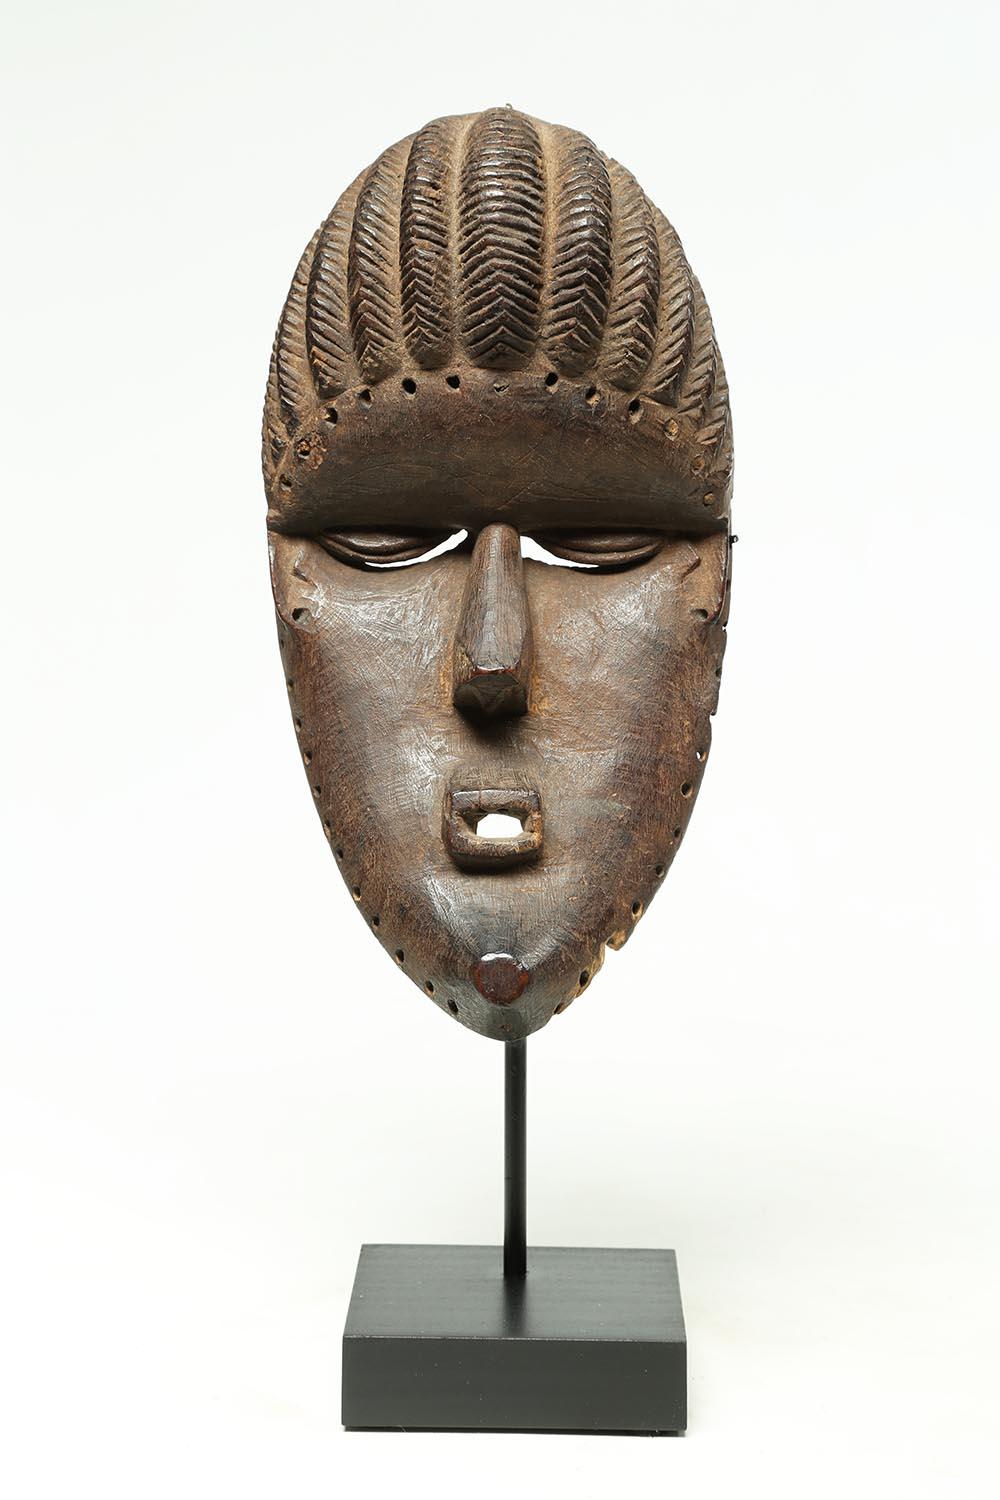 Hand-Carved Bassa Tribal Wood Dance Mask with Geometric Features, Early 20th Century, Africa